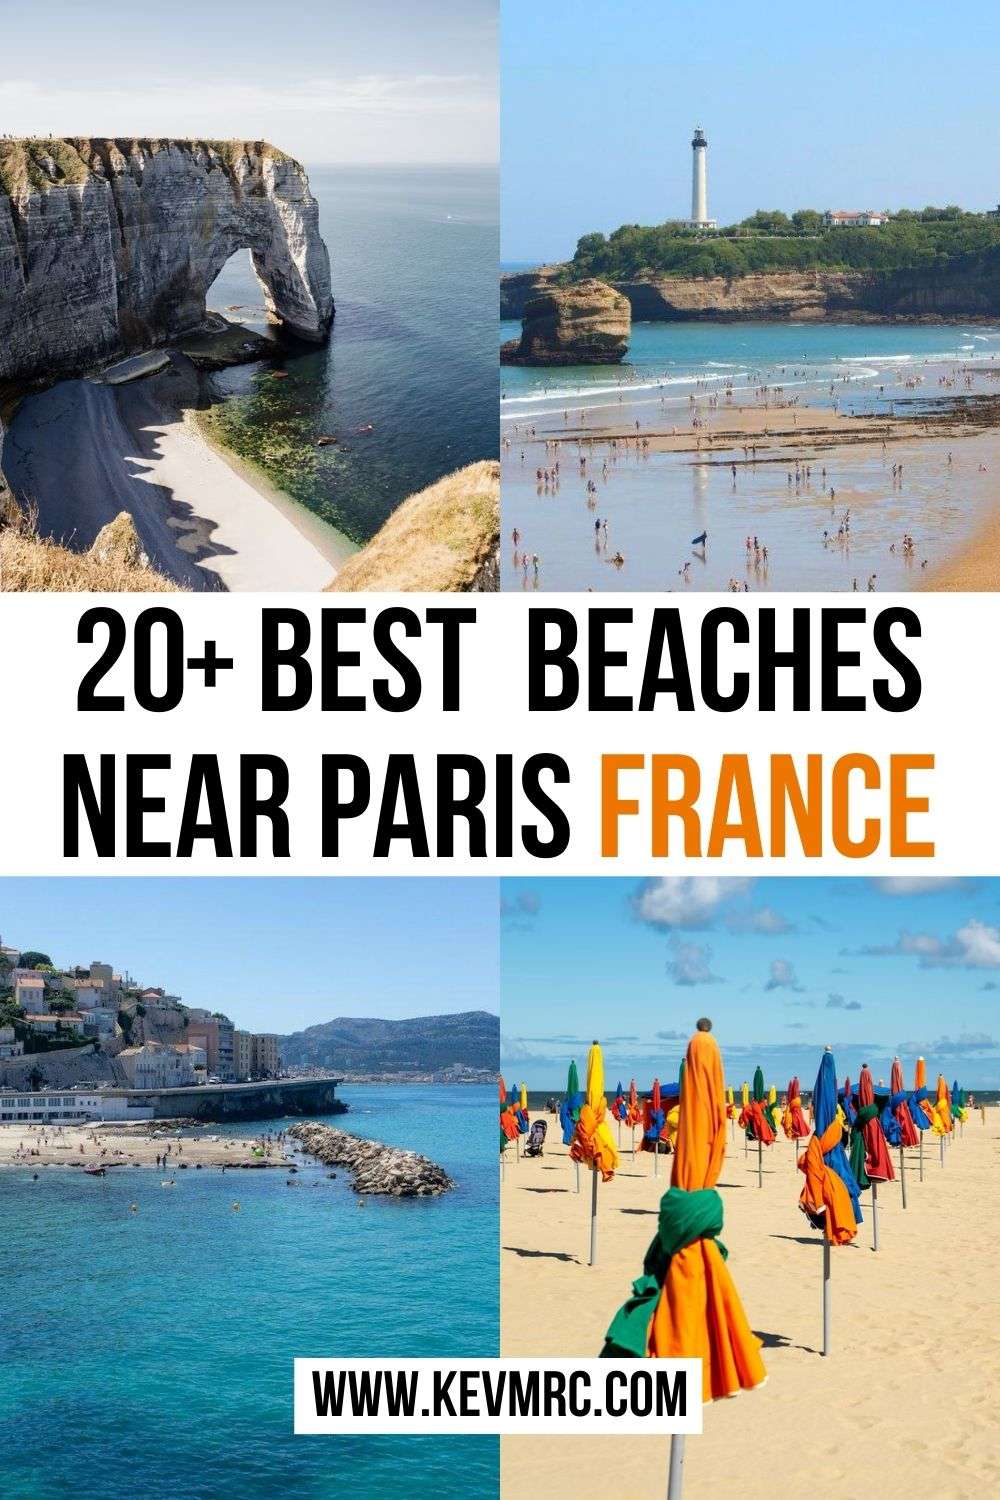 Looking for beaches close to Paris to enjoy a getaway? Follow this guide to find the 21 best beaches near Paris, ranked by distance. paris beach | places to visit near paris | paris vacation | paris holidays | summer in paris | paris getaway | weekend getaway from paris | places near paris